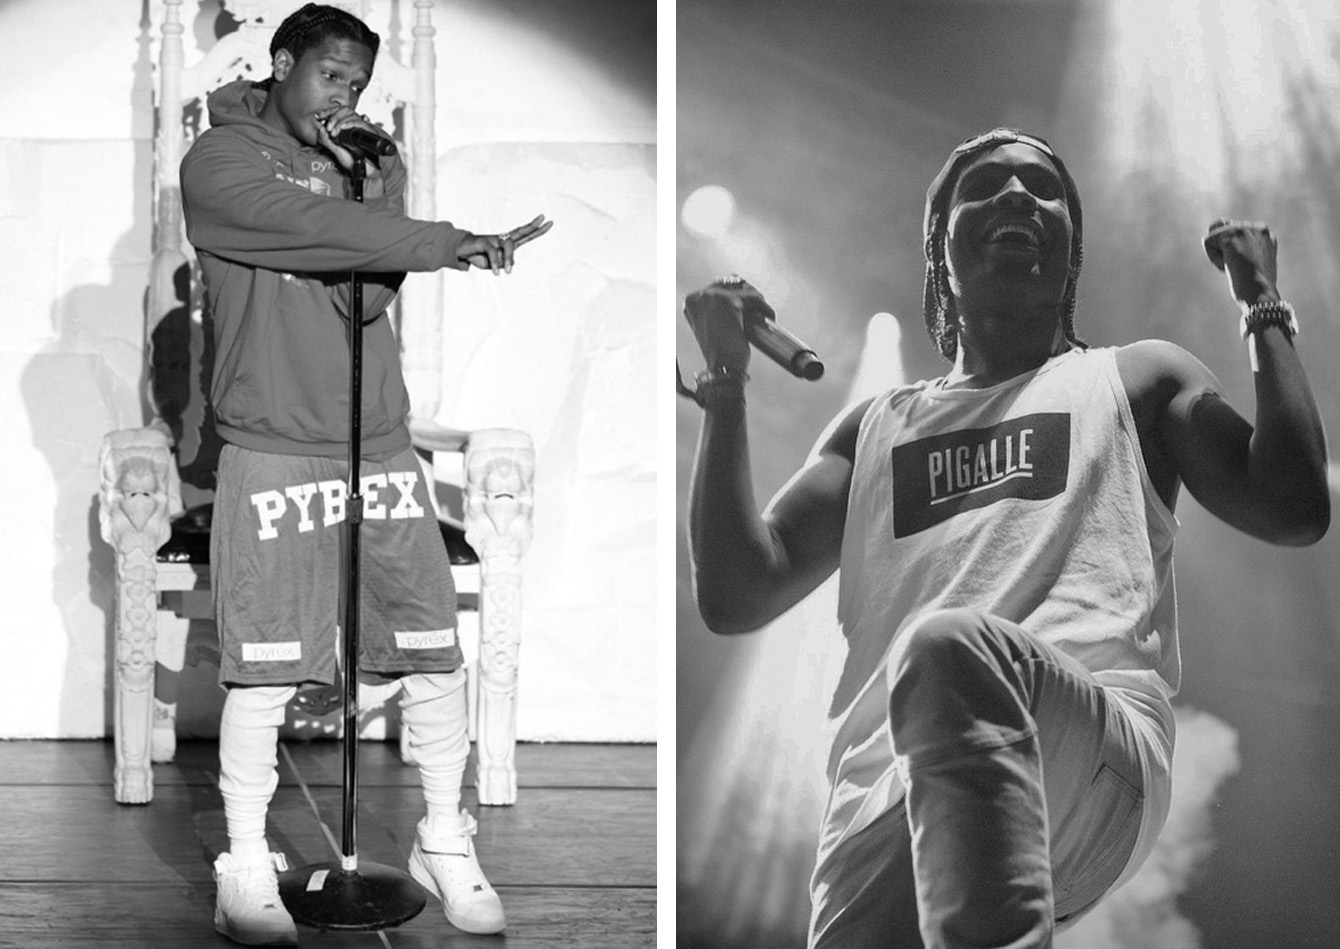 A$AP Rocky debuts the new Rick Owens x adidas collaboration